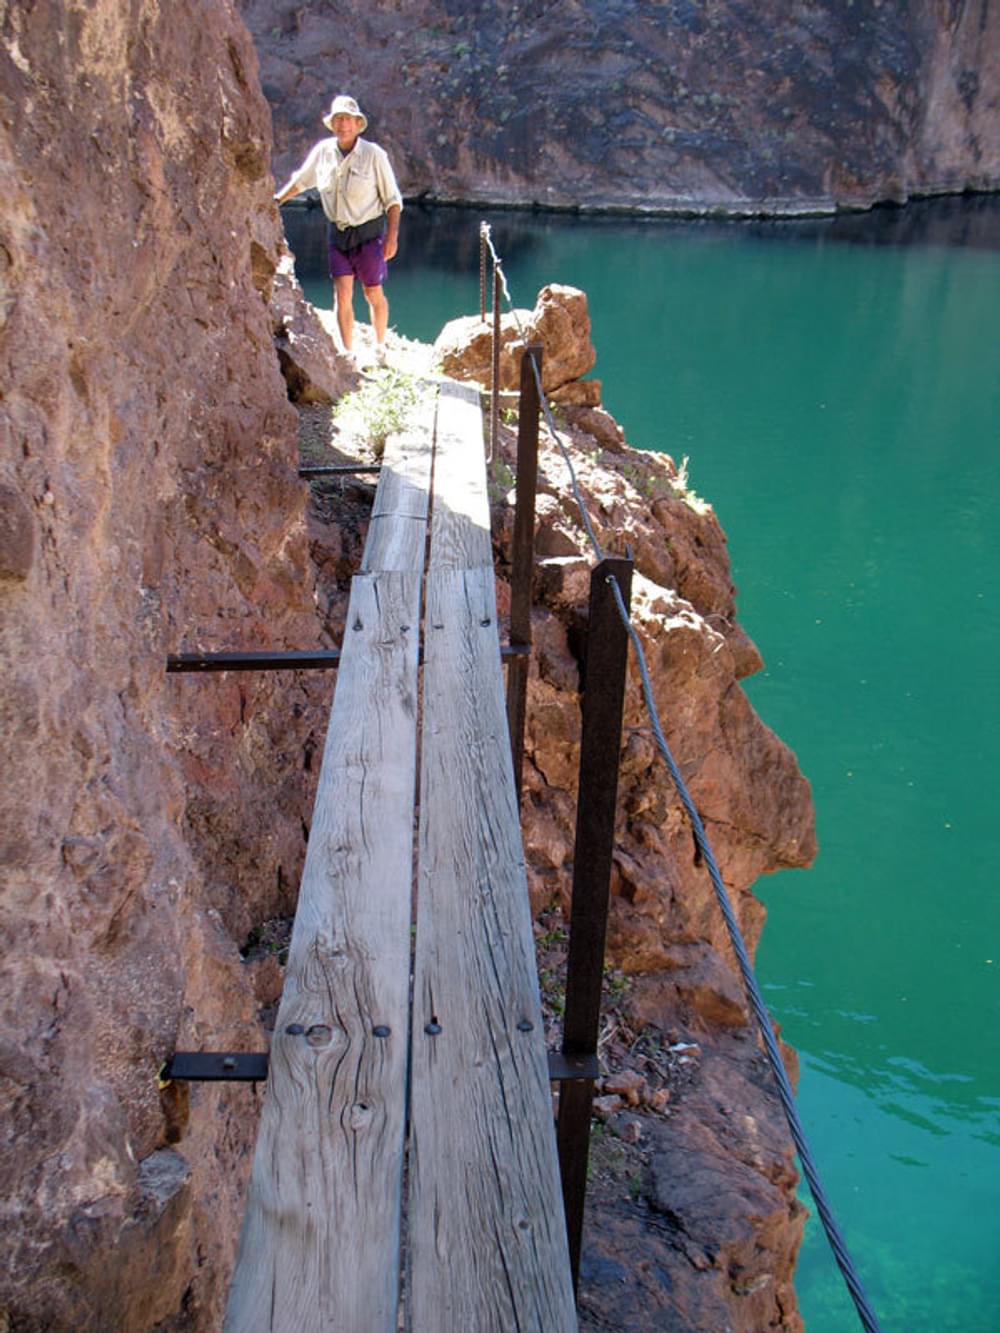 Catwalk Trail to the water gauging on the Colorado River/Lake Mohave, Black Canyon Water Trail